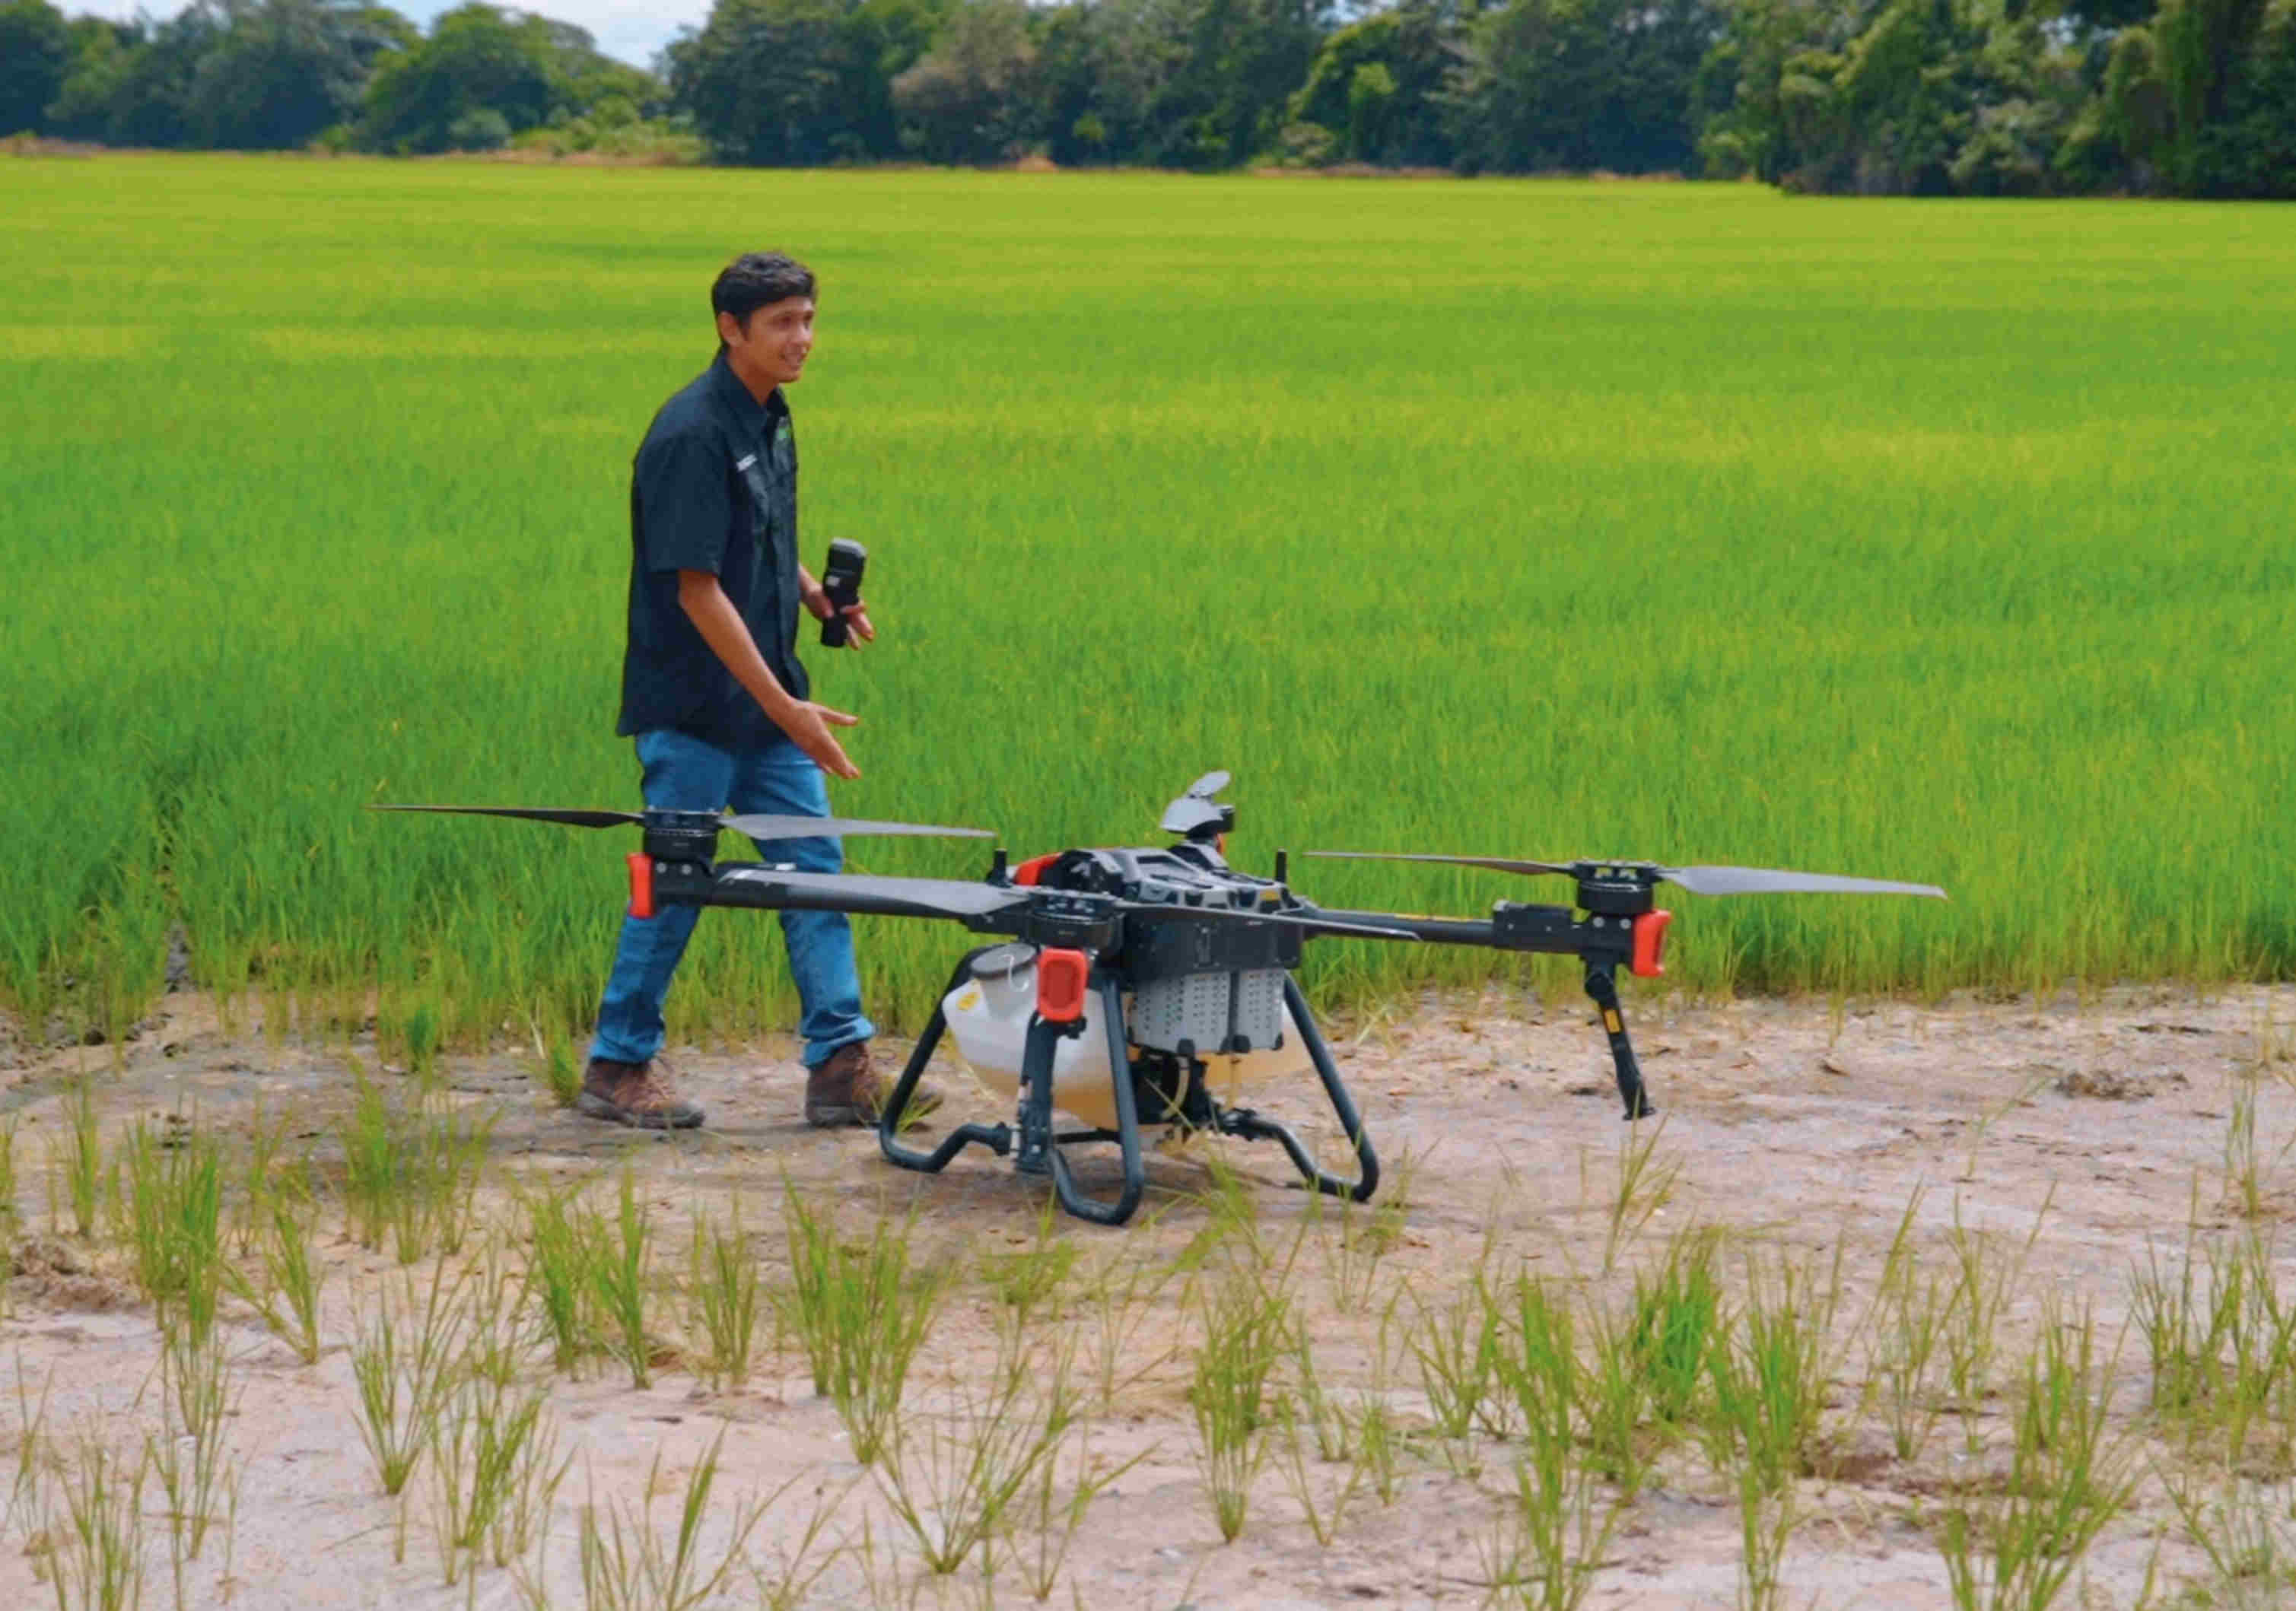 XAG Drone Supports Panama Farmers Shift Focus to Cost-Saving Sustainability